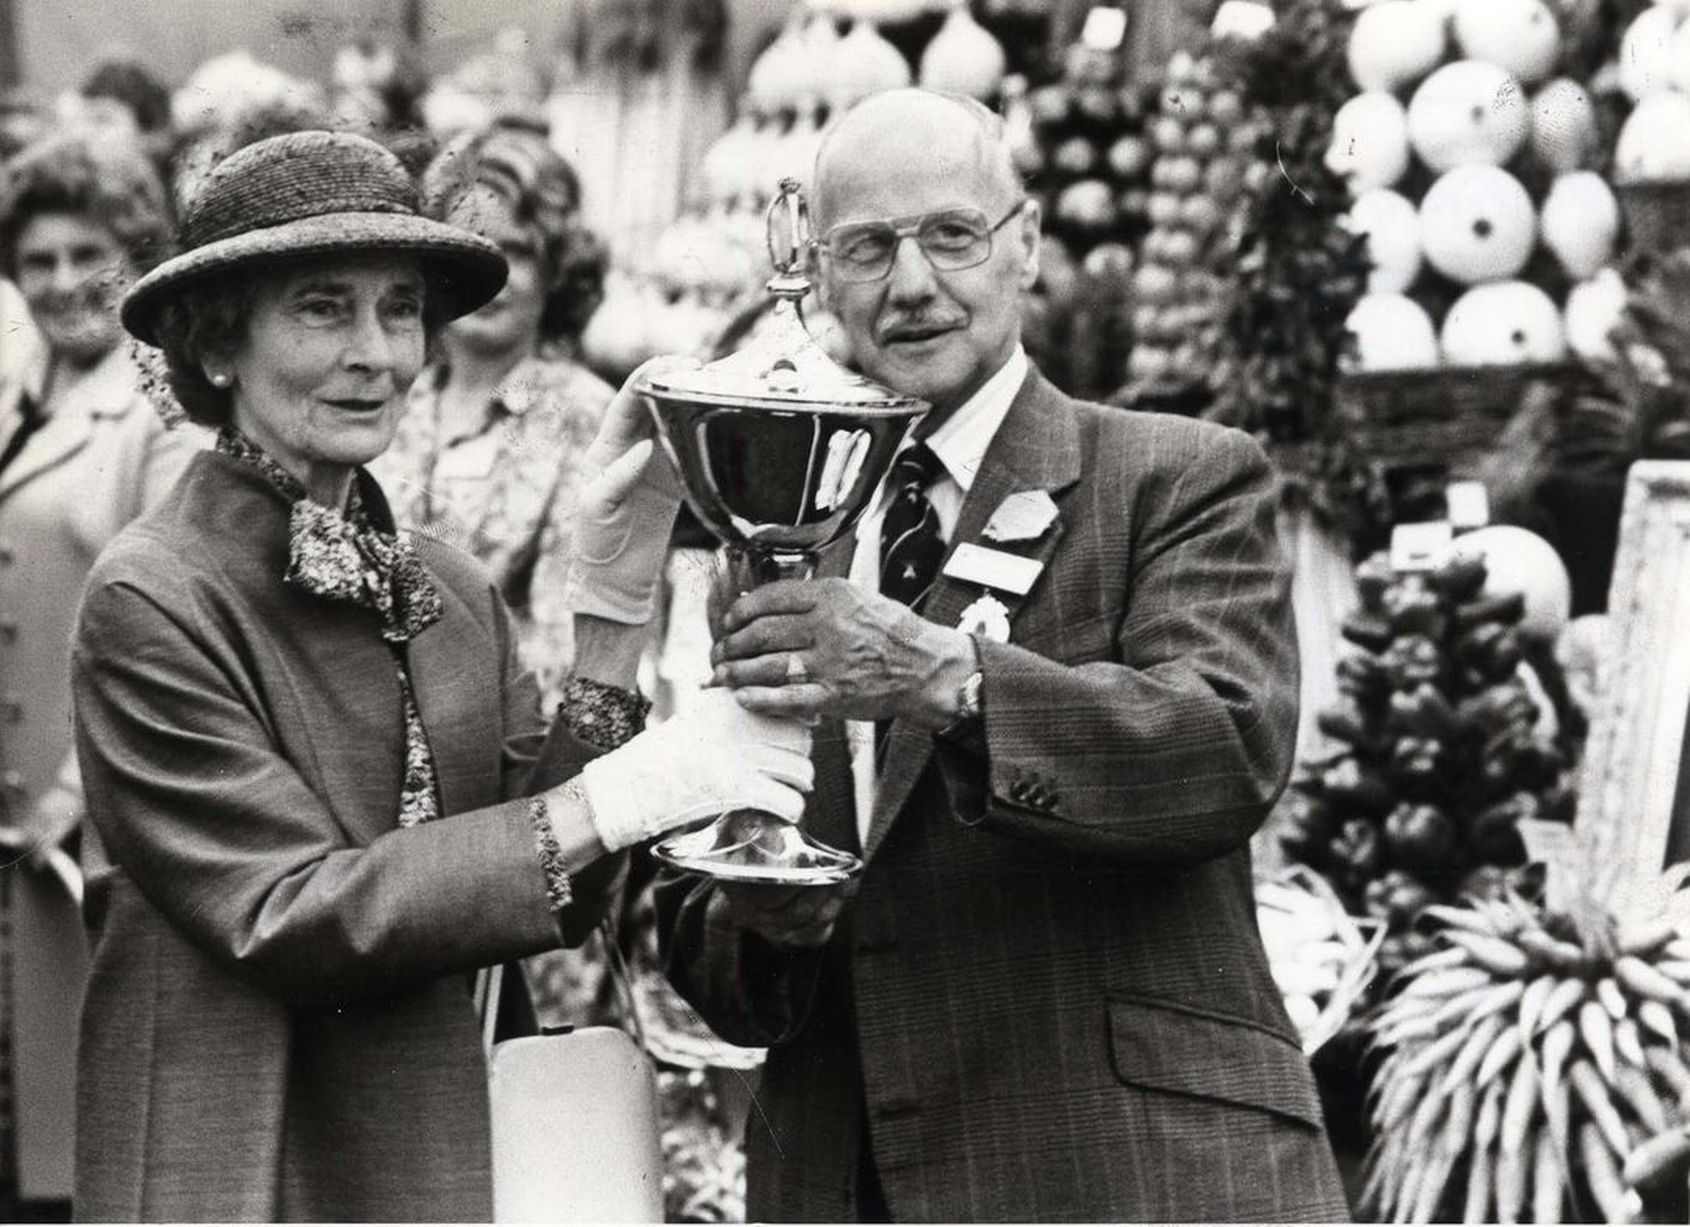 Martin Robinson receives the Brookhouse Trophy for Best Exhibit in Show from Princess Alice, Duchess of Gloucester, at the 1979 Southport Flower Show